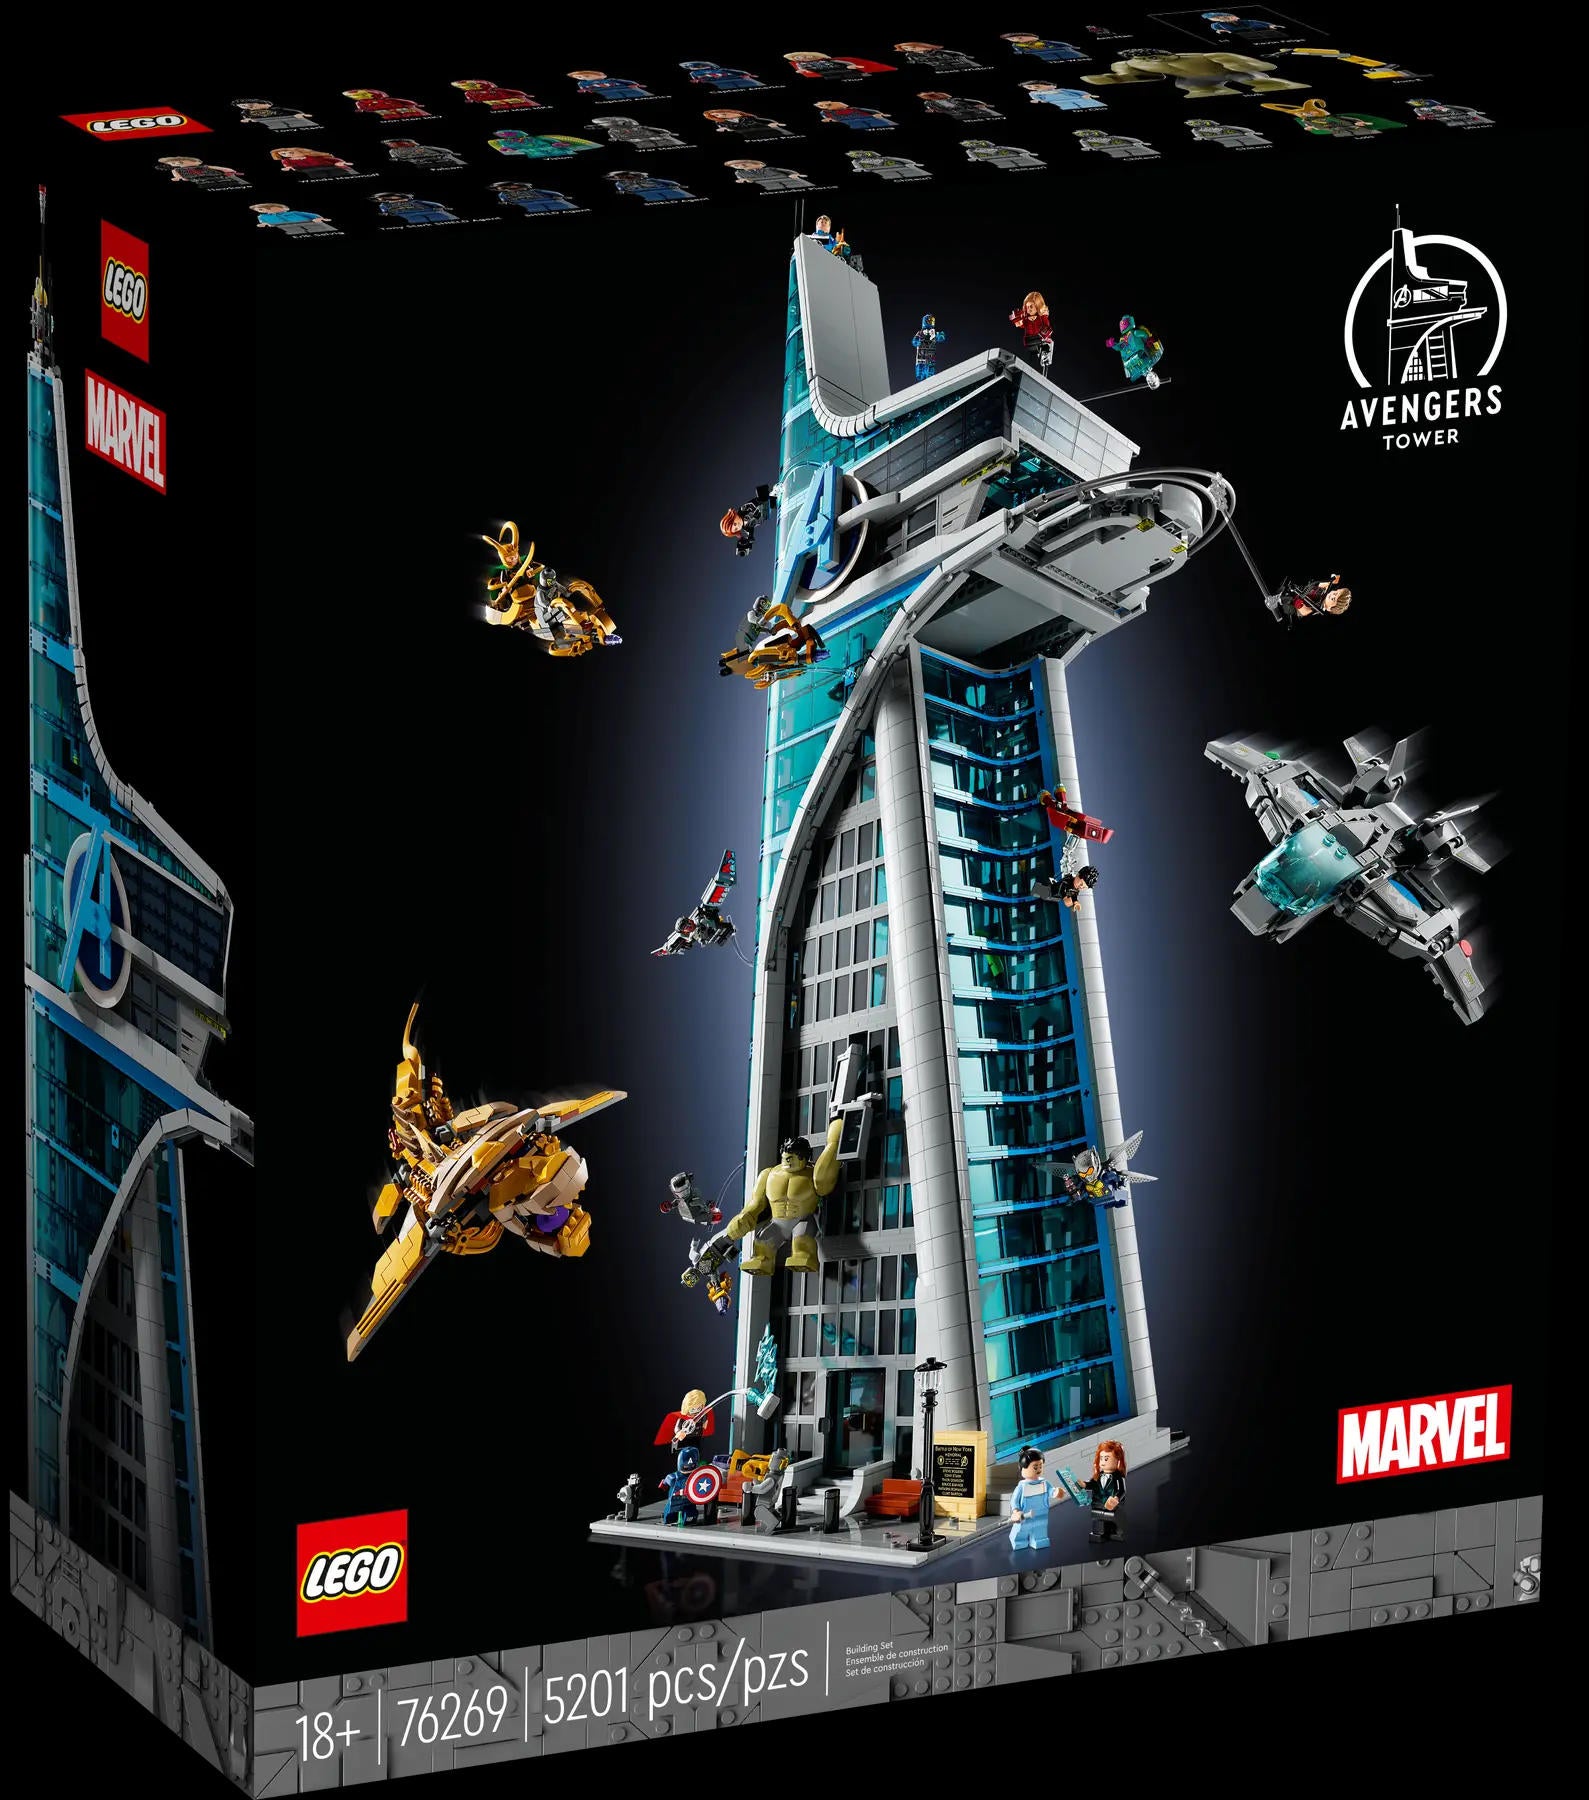 Will you be buying the $525 Lego Avengers Tower? 👀 (news source: @pro